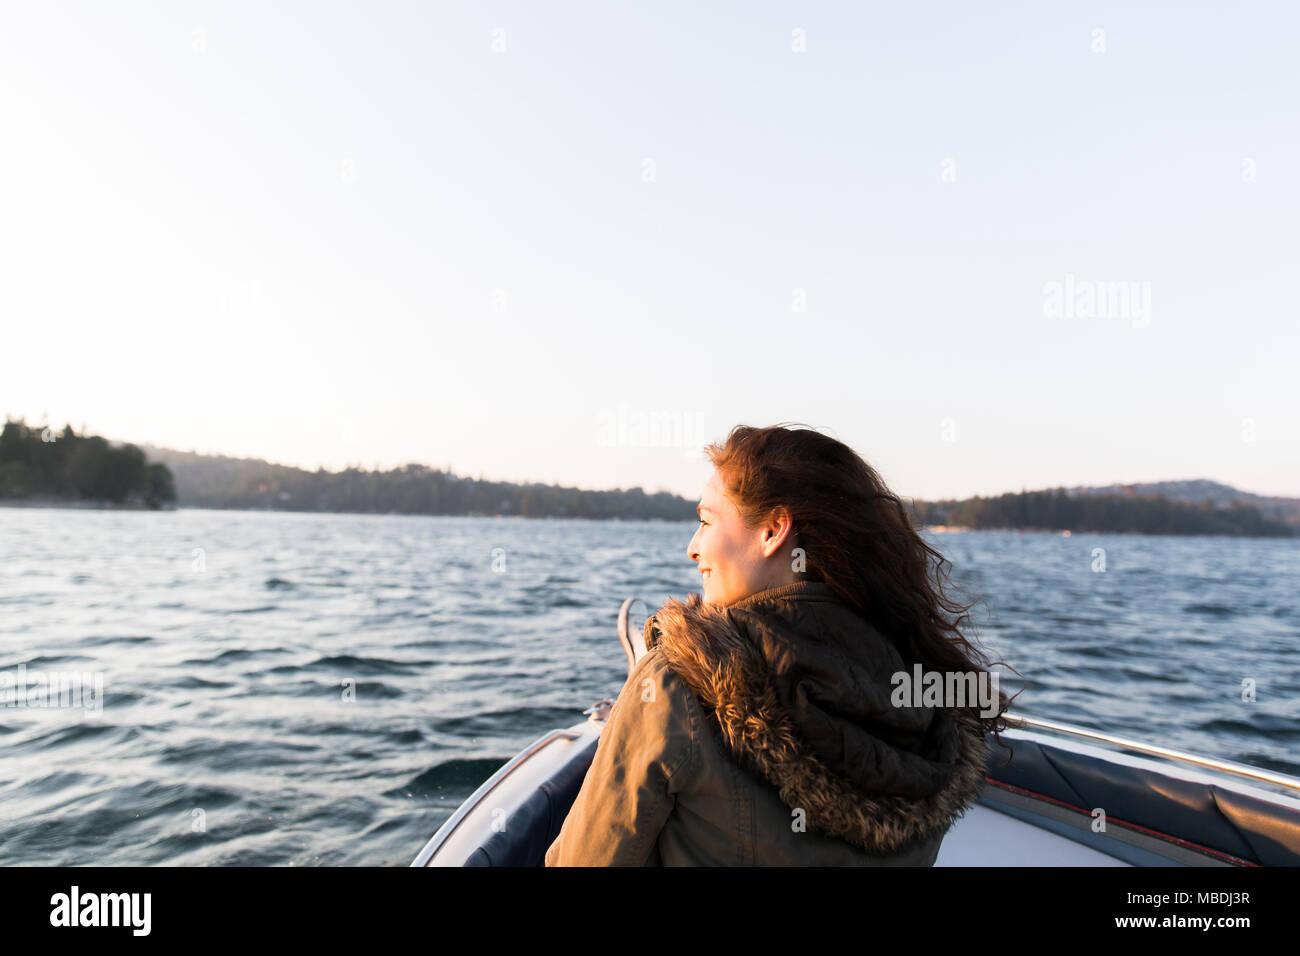 Smiling woman boating on sunny, tranquil lake Stock Photo